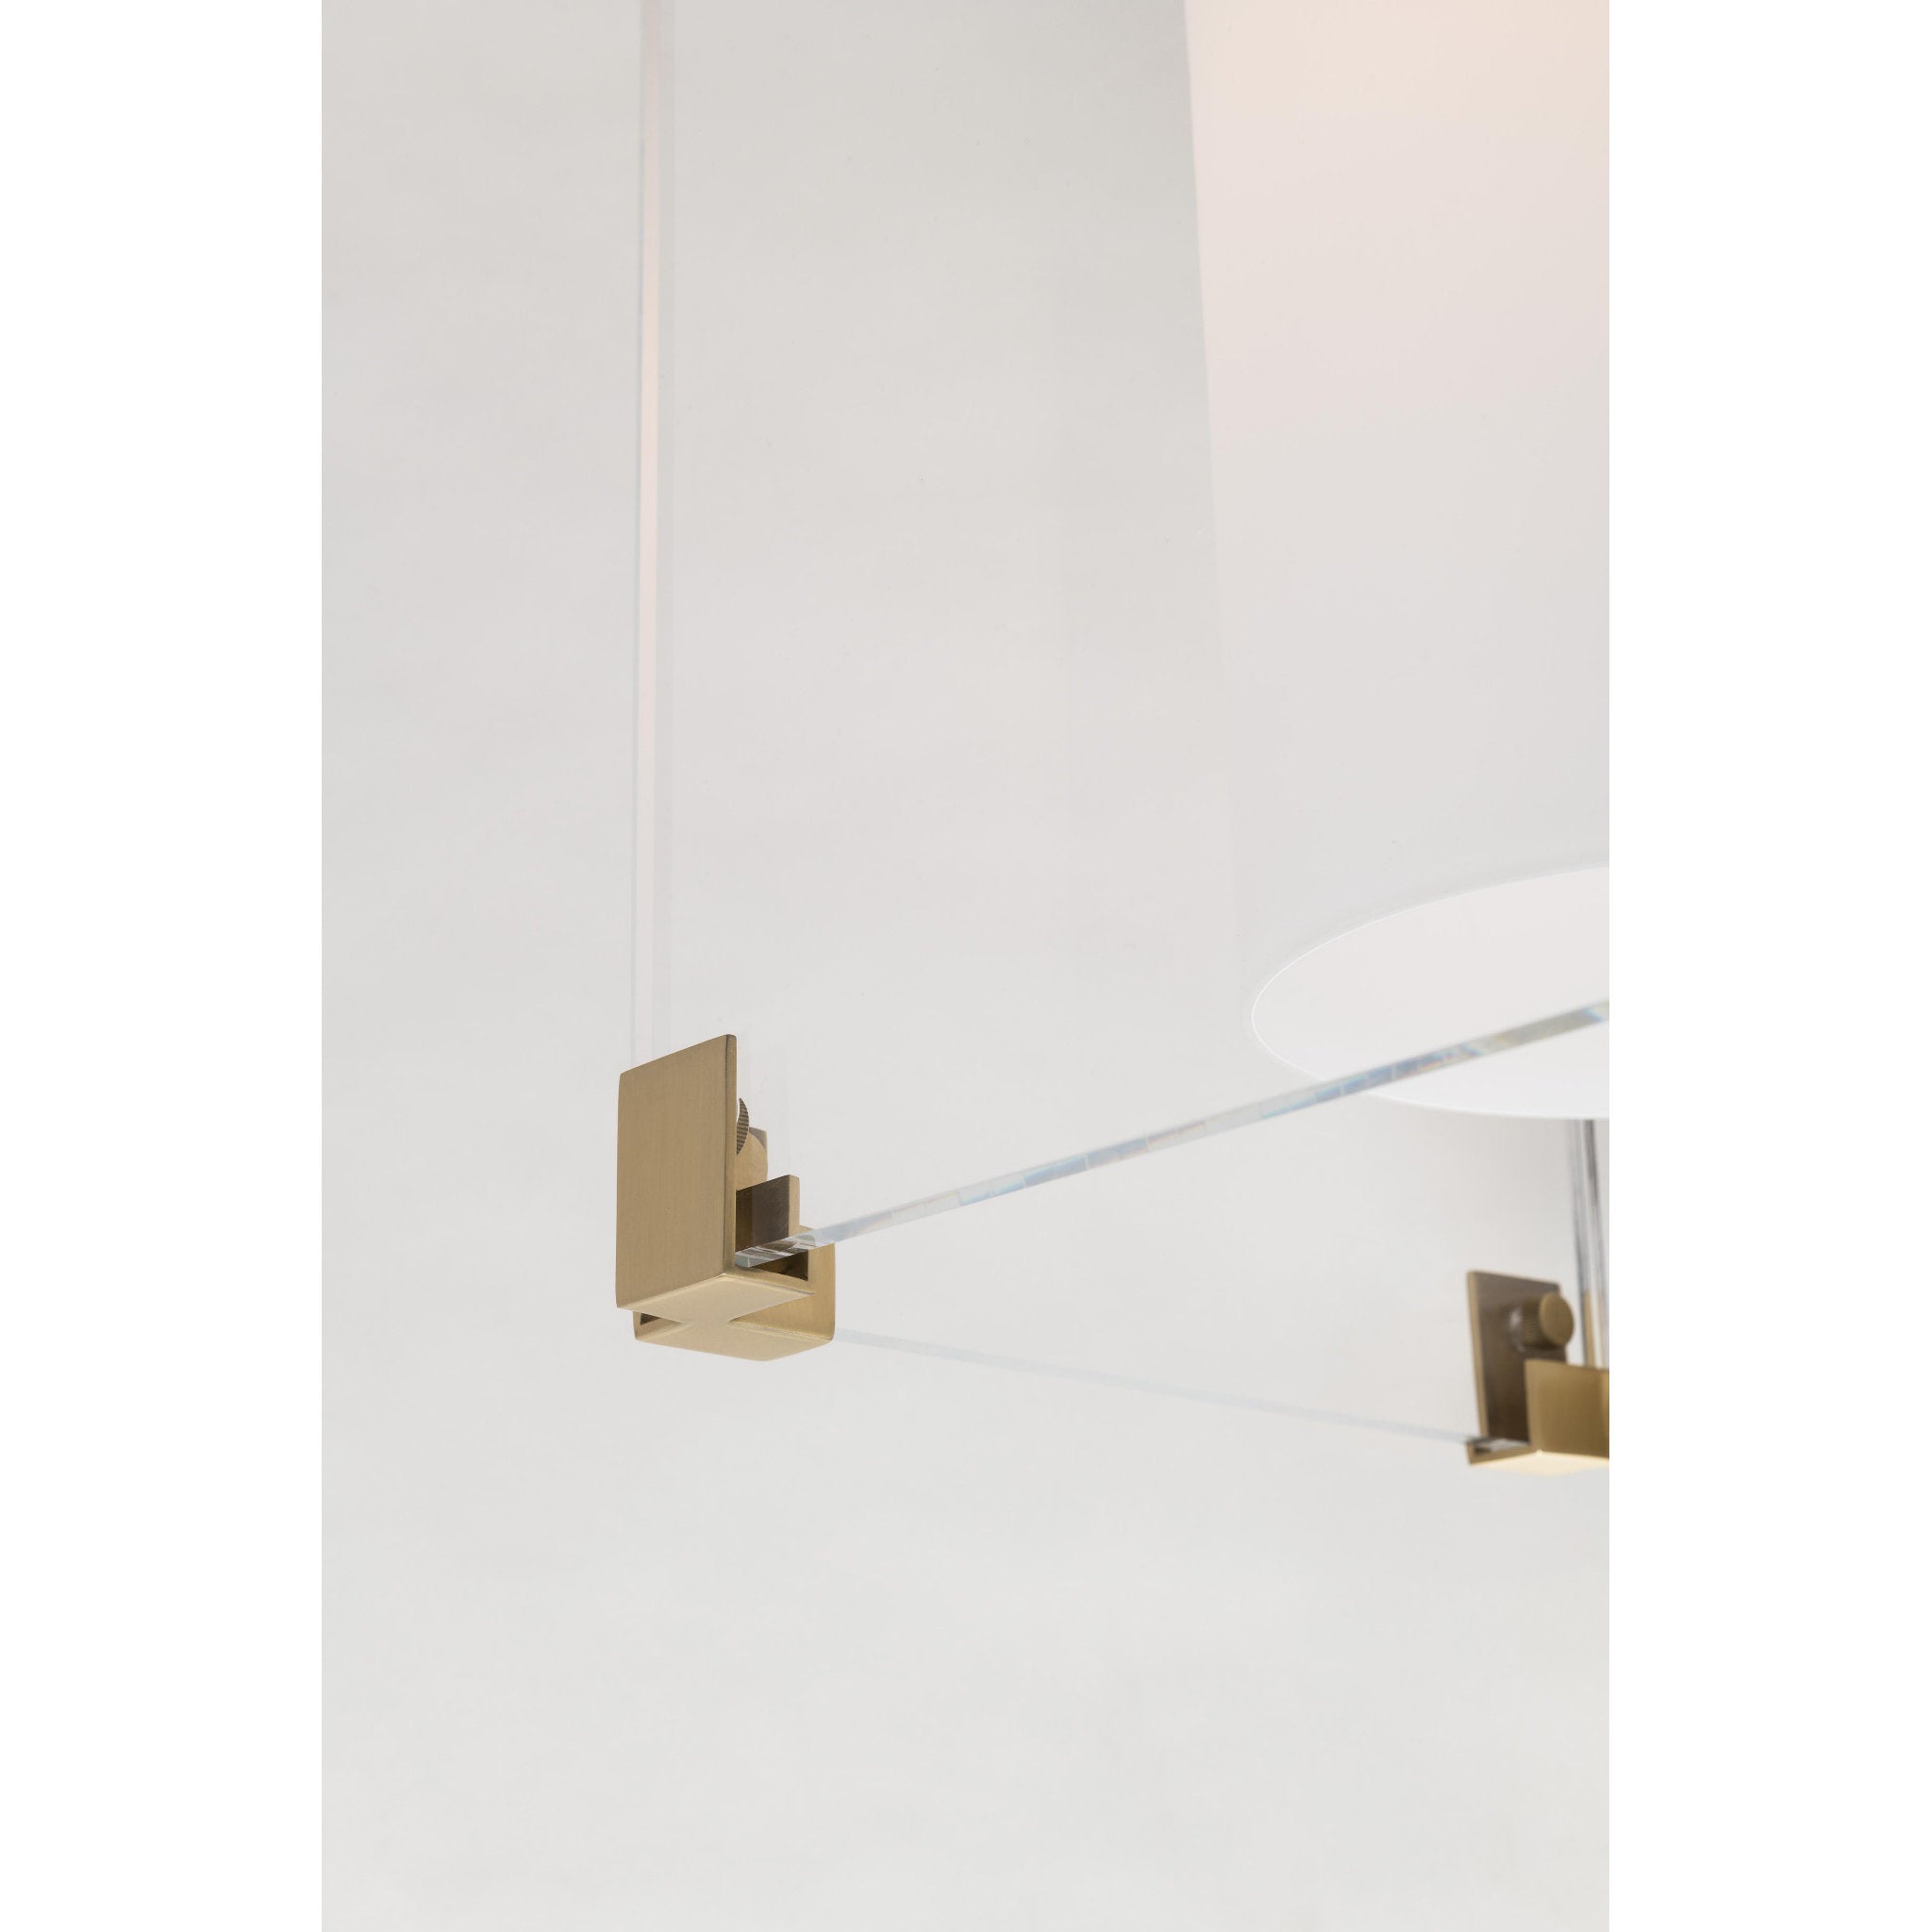 Achilles 3 Light Pendant in Polished Nickel